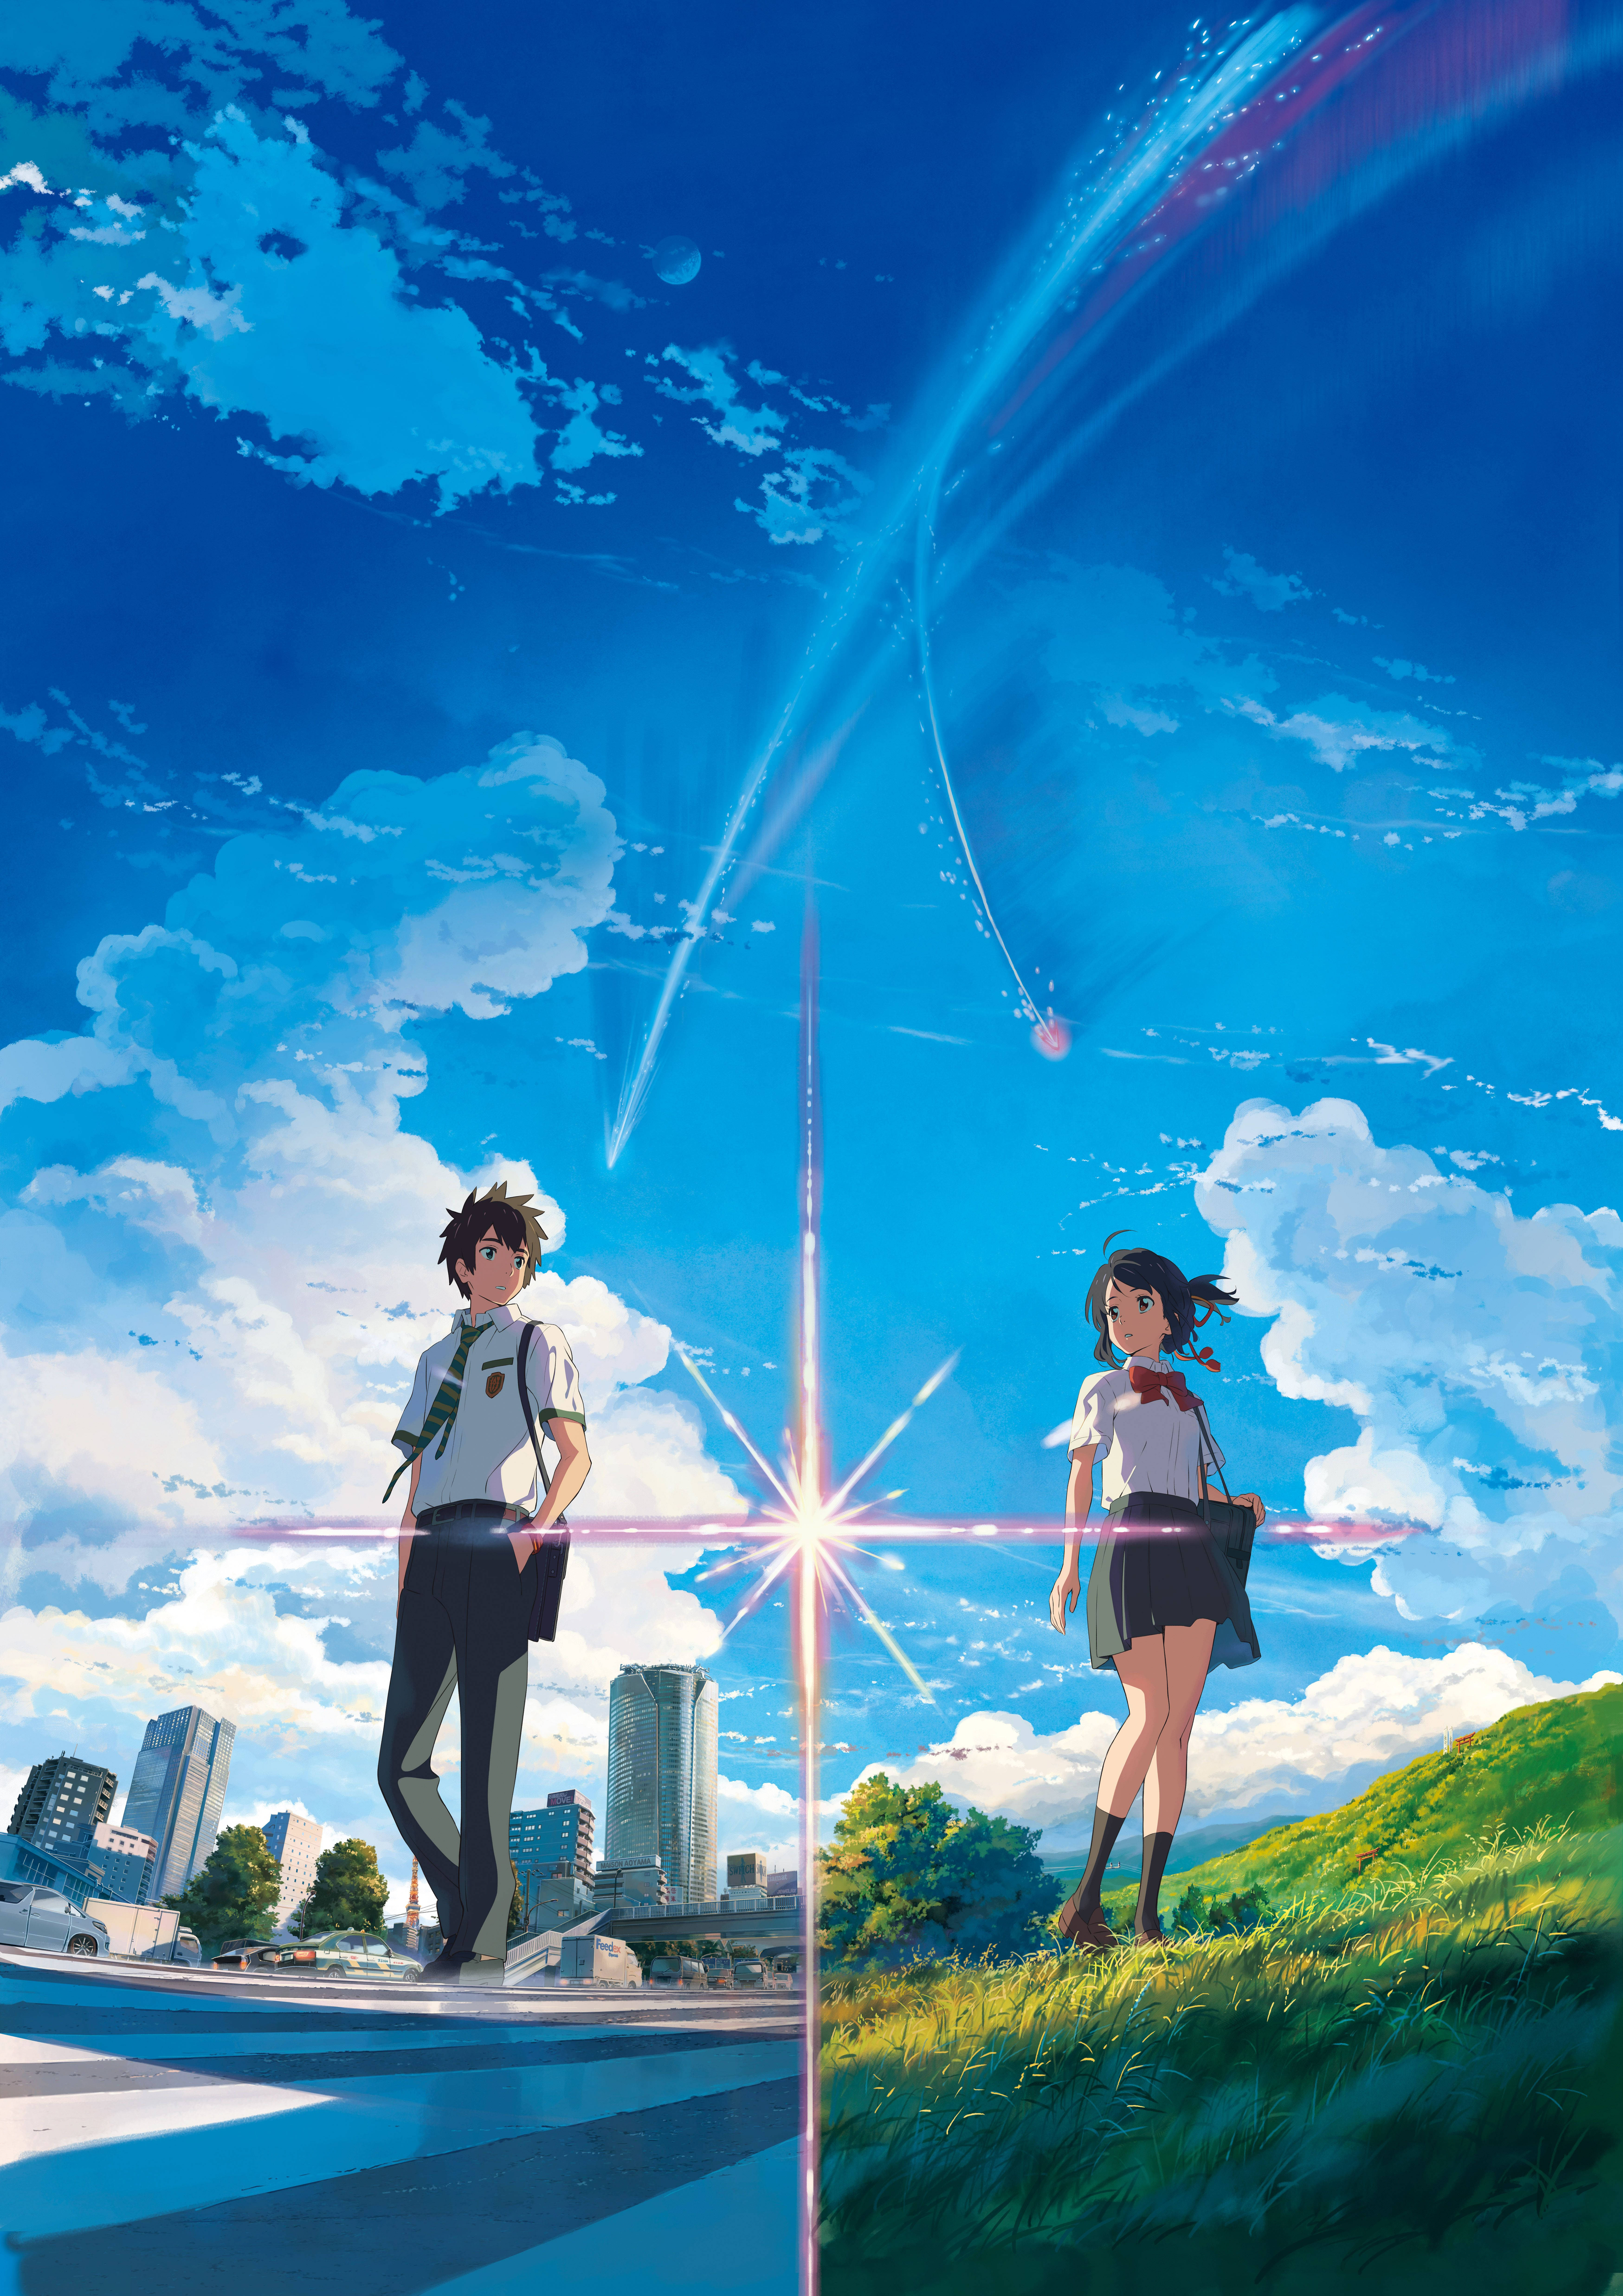 Your Name 4k Ultra HD Wallpaper